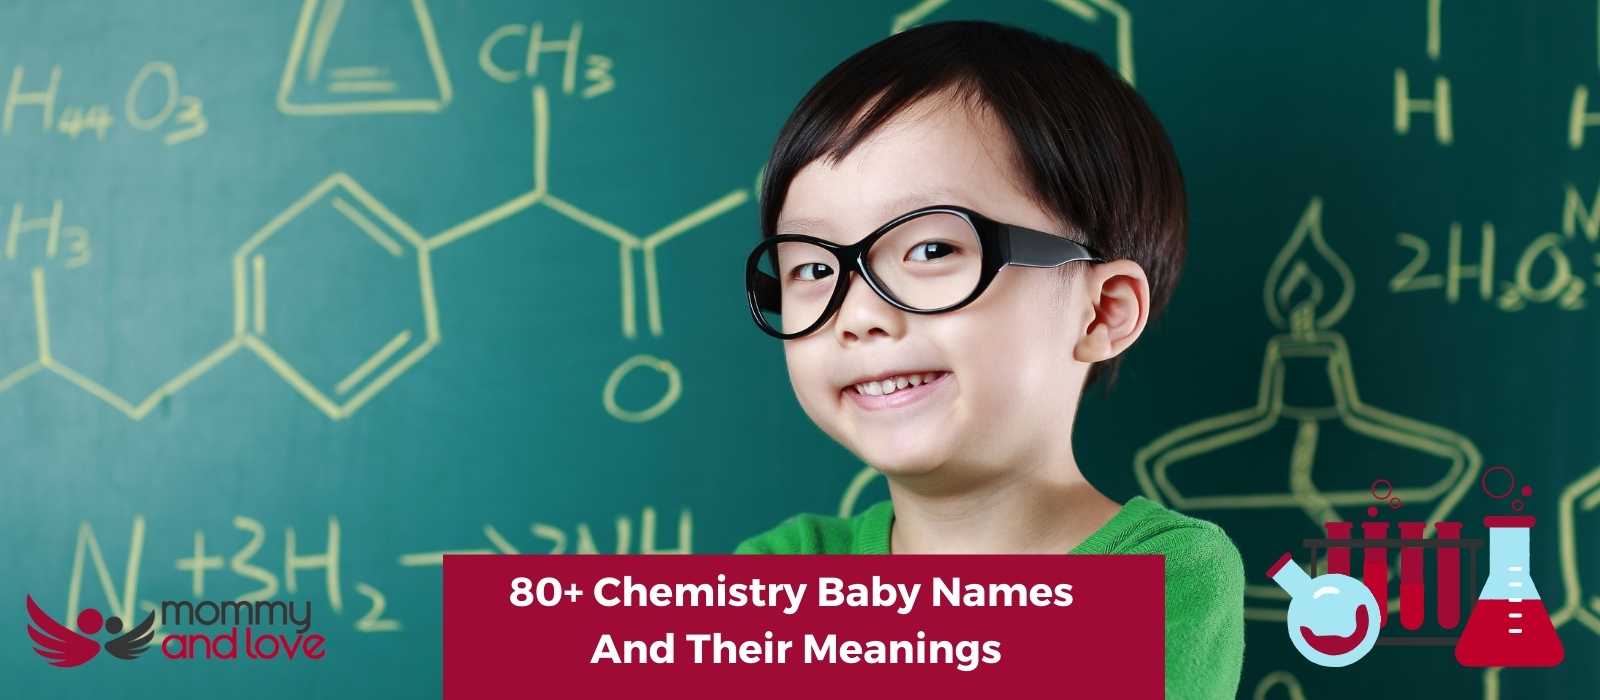 80+ Chemistry Baby Names And Their Meanings